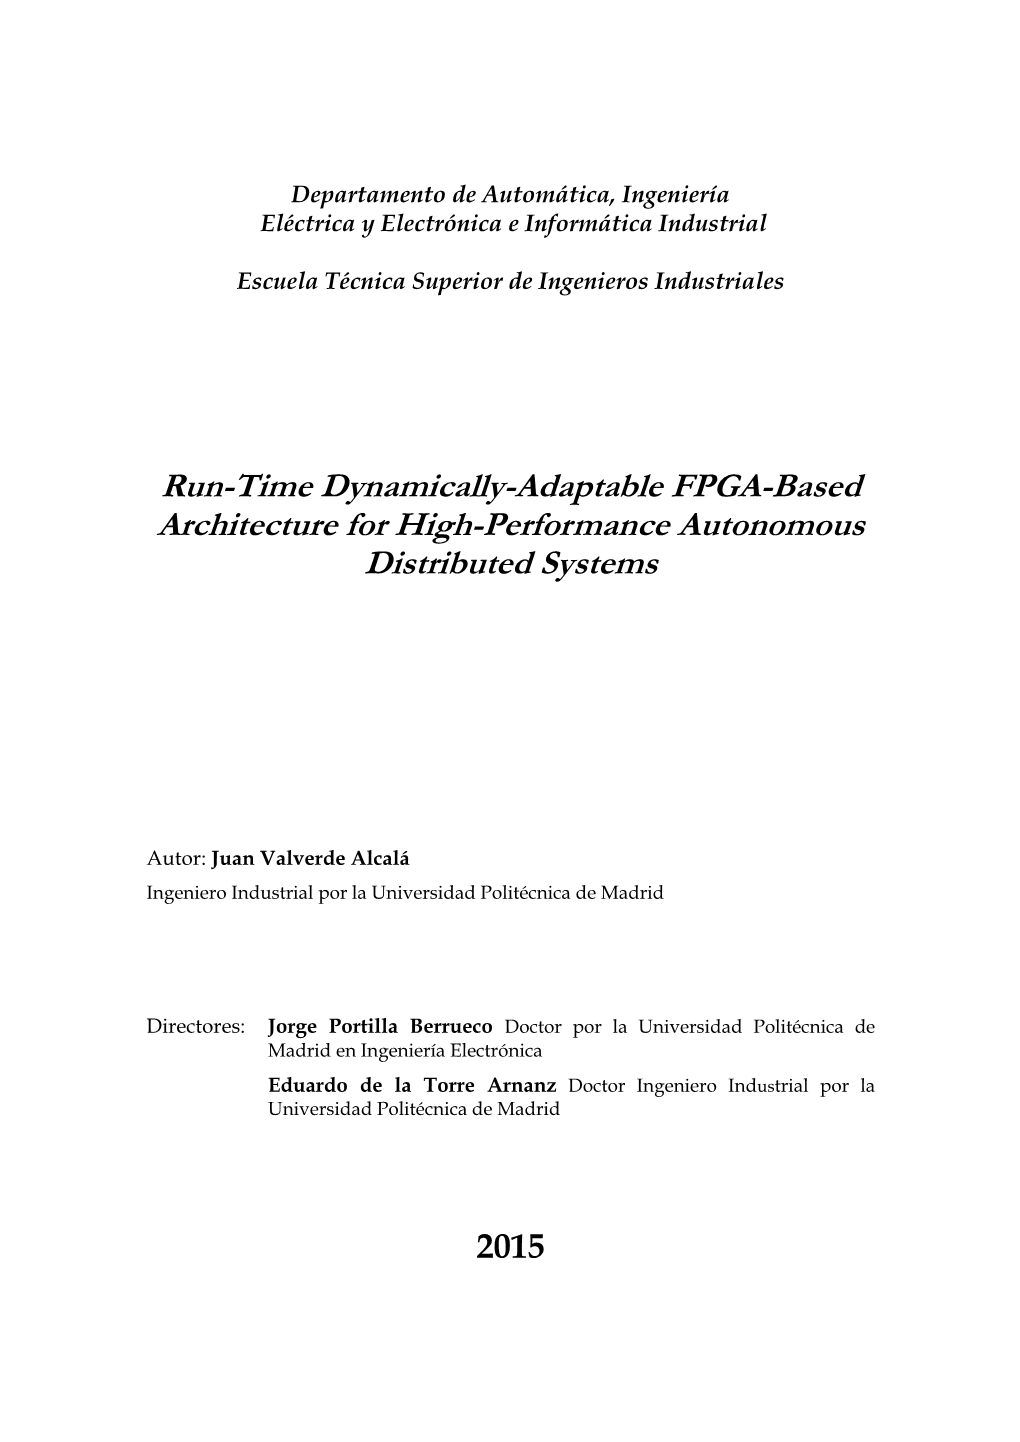 Run-Time Dynamically-Adaptable FPGA-Based Architecture for High-Performance Autonomous Distributed Systems